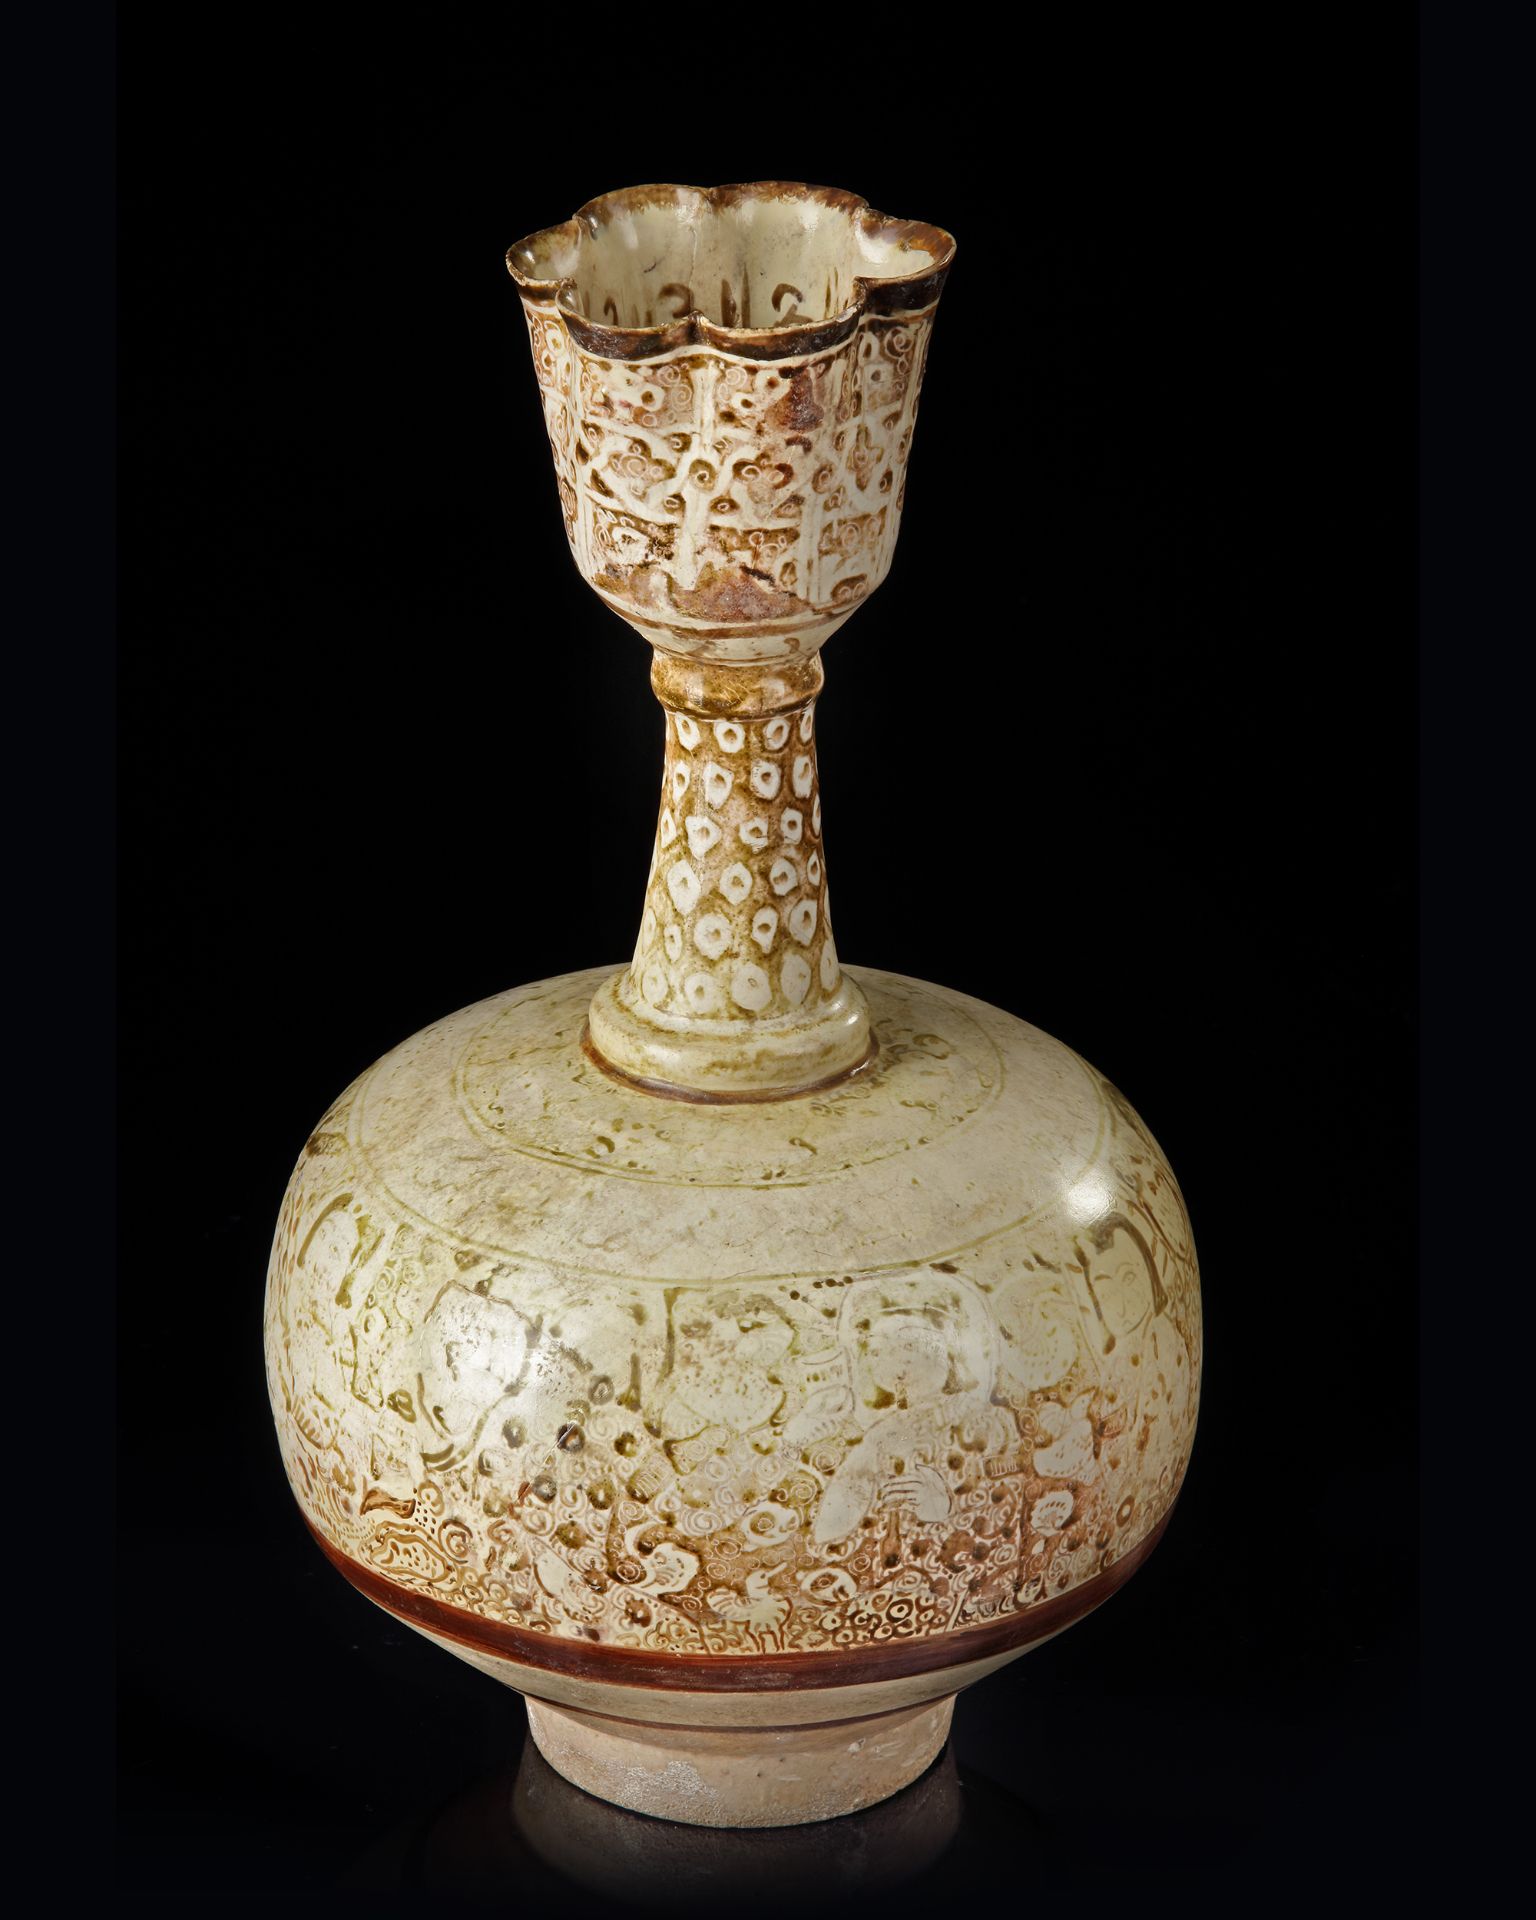 A KASHAN LUSTRE POTTERY BOTTLE VASE, PERSIA, EARLY 13TH CENTURY - Image 5 of 10